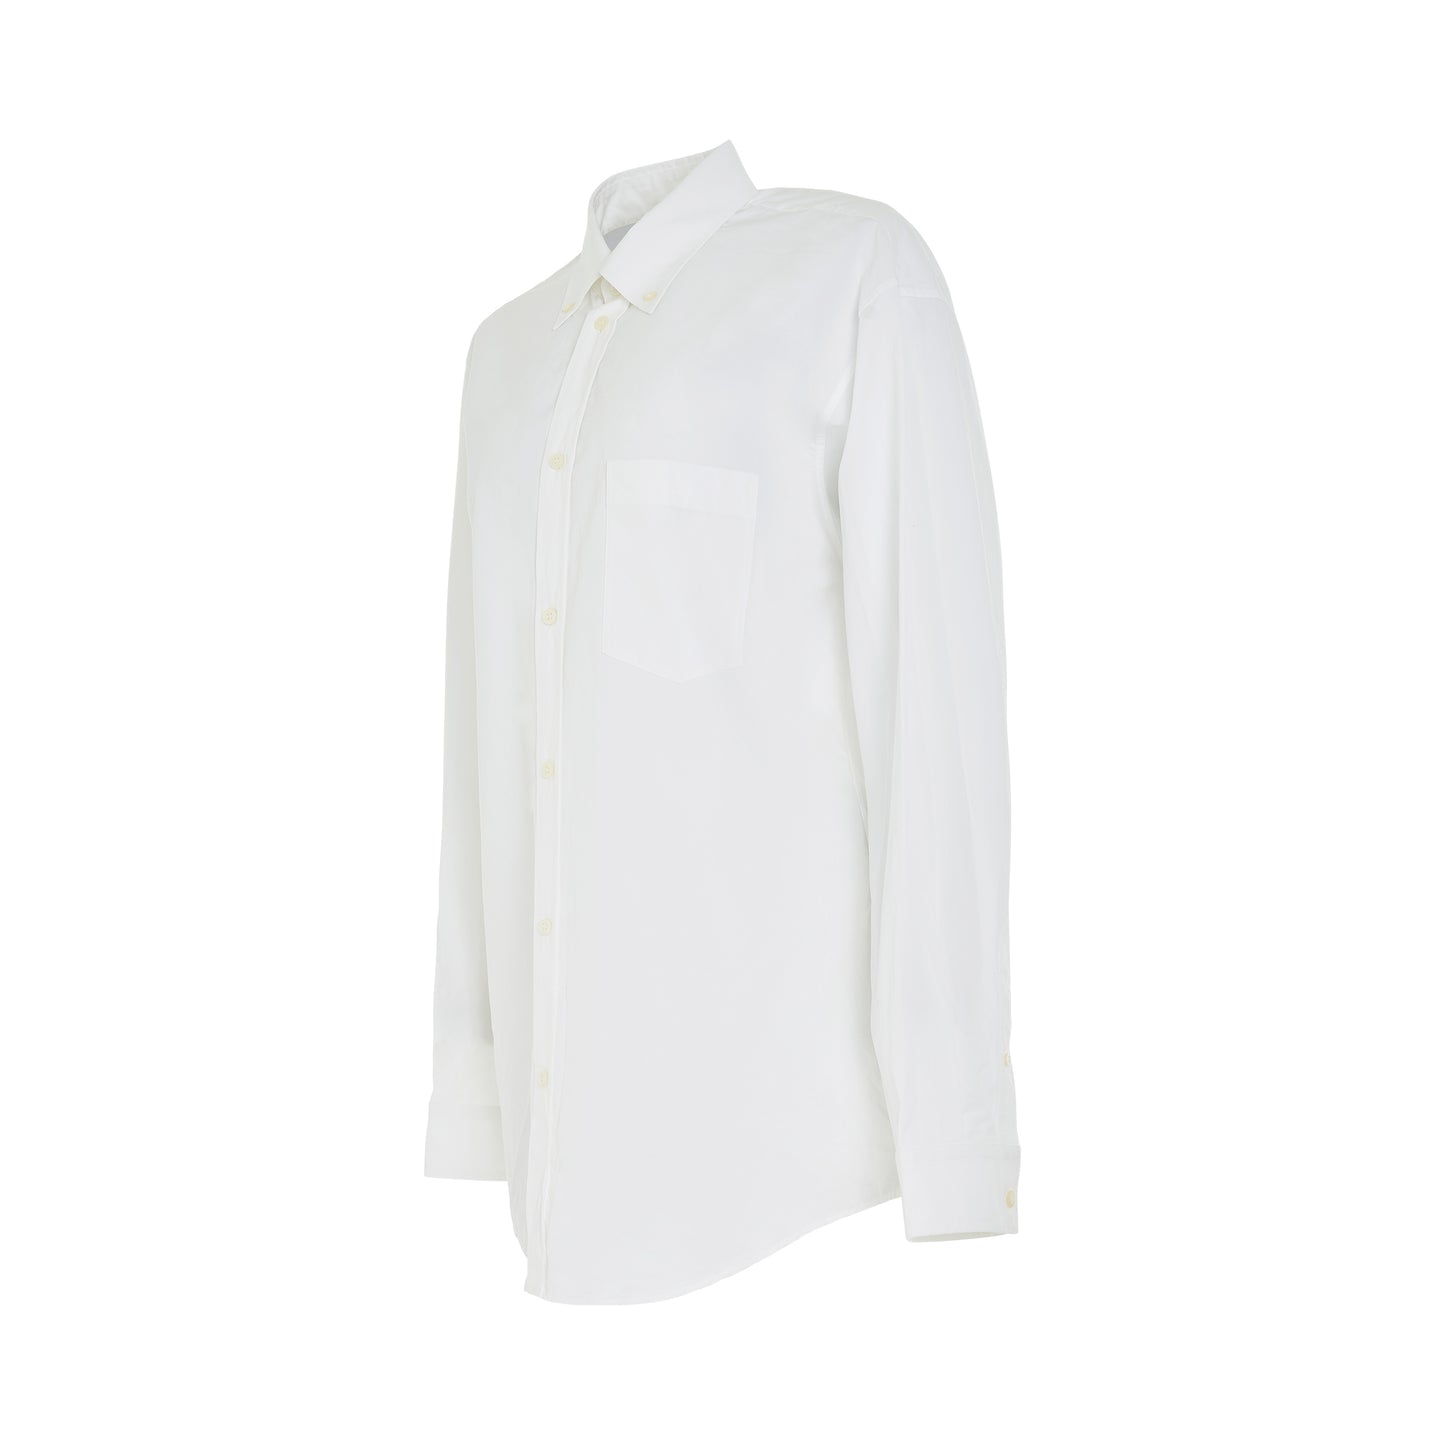 Poplin Large Fit Shirt in White